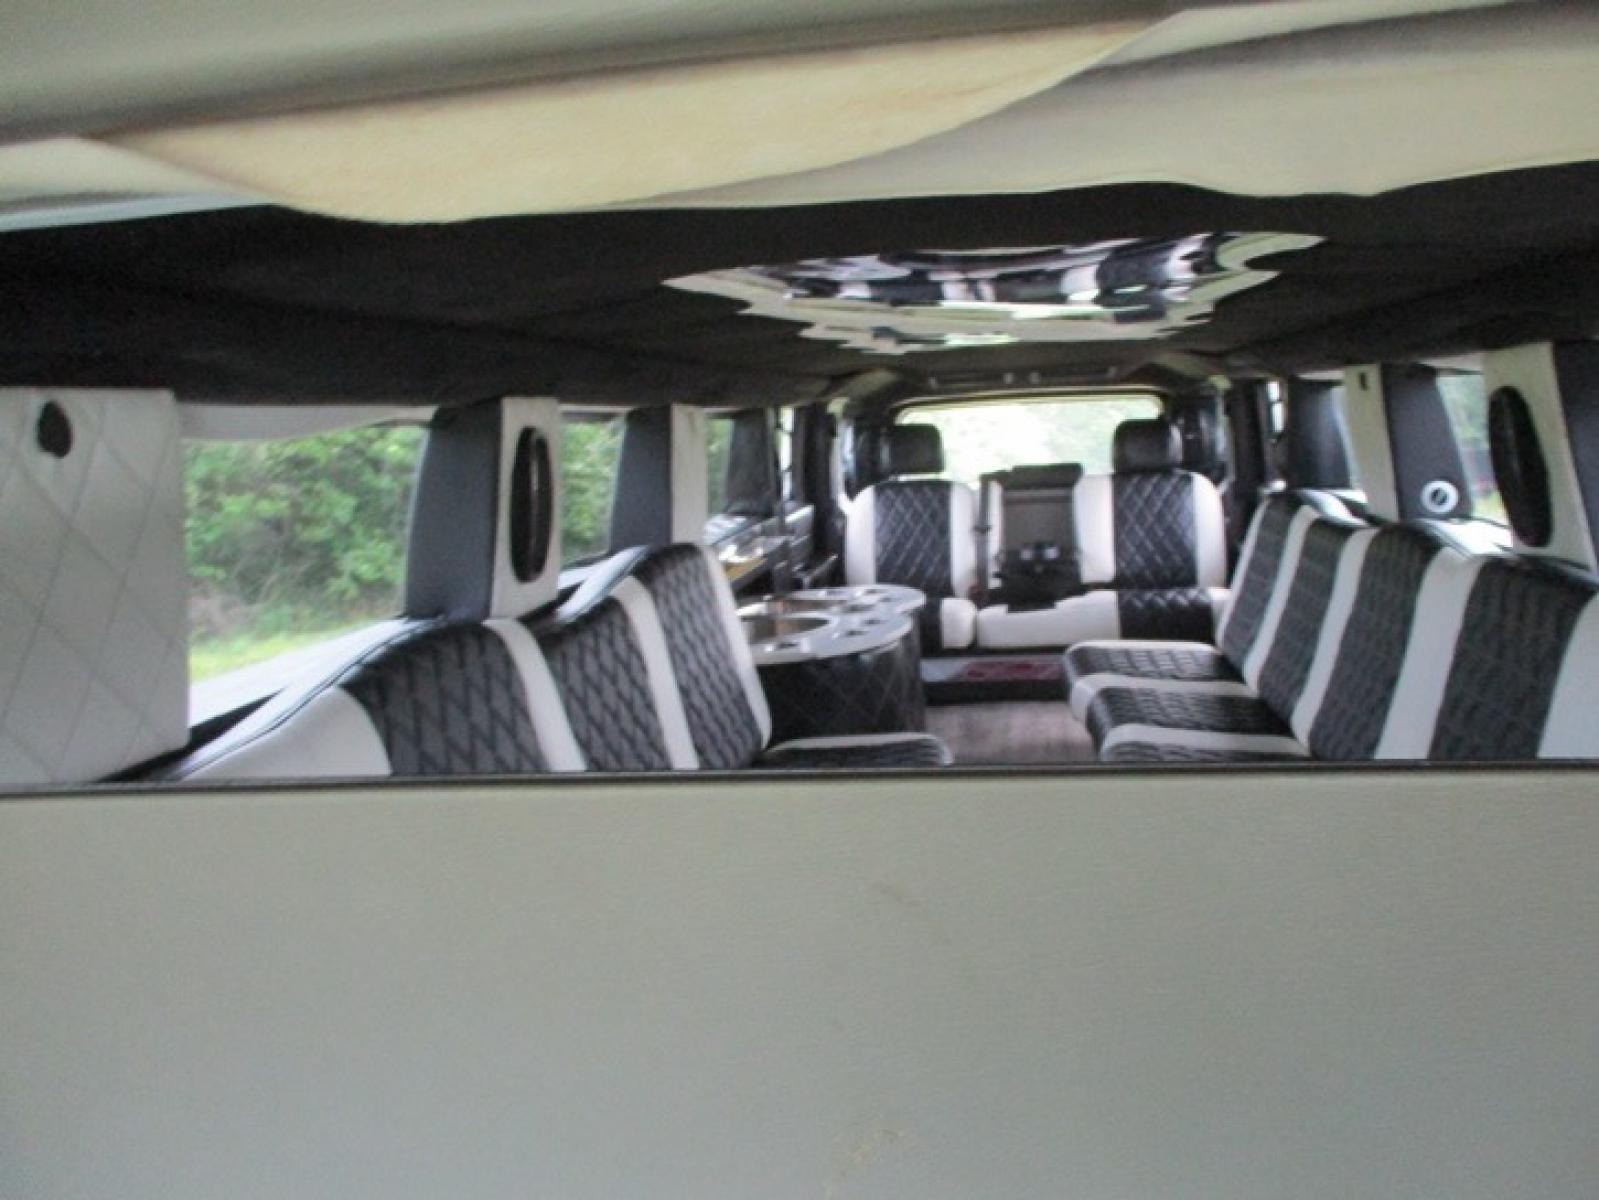 2005 White /White/Black Hummer H2 , located at 1725 US-68 N, Bellefontaine, OH, 43311, (937) 592-5466, 40.387783, -83.752388 - 2005 Hummer H2 175" SUV VIP Limousine, White w/White/black leather interior, Front/Rear Ait, Flat Screens, AM/FM/CD reconditioned Interior, LOADED - Photo #9